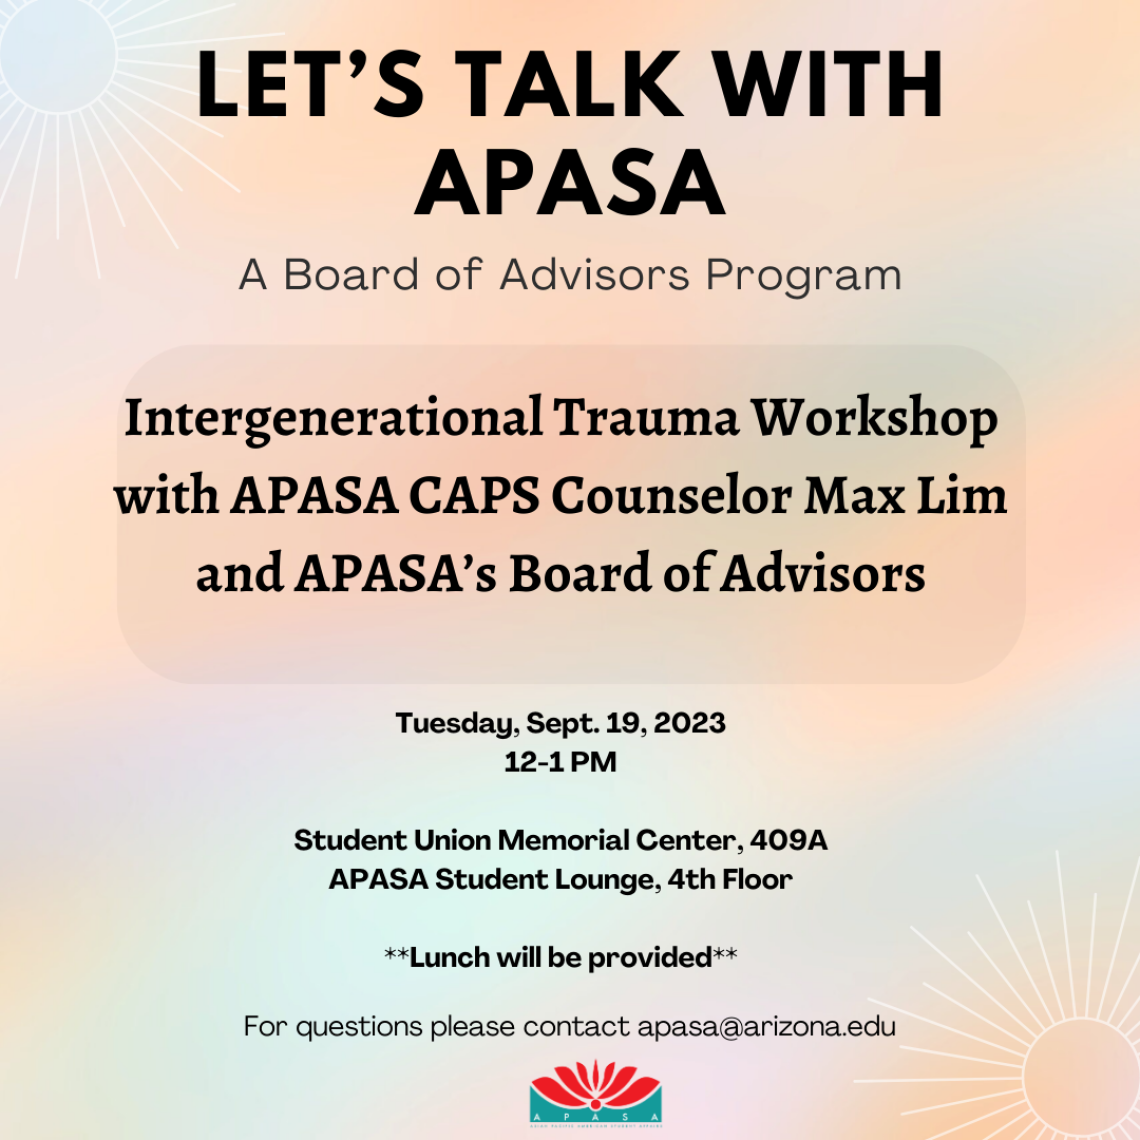 ID: Multi-colored background of orange, pink, purple and blue with white icons in the shape of a sun in top left, adn bottom right corners. Text in black reads: "Let's talk with APASA A Board of Advisors Program Intergenerational Trauma Workshop with APASA CAPS Counselor Max Lim and APASA's Board of Advisors Tuesday, Sept. 19, 2023 12-1 PM Student Union Memorial Center, 409A APASA Student Lounge, 4th Floor ** Lunch will be provided** For questions please contact apasa@arizona.edu" APASA logo in bottom.